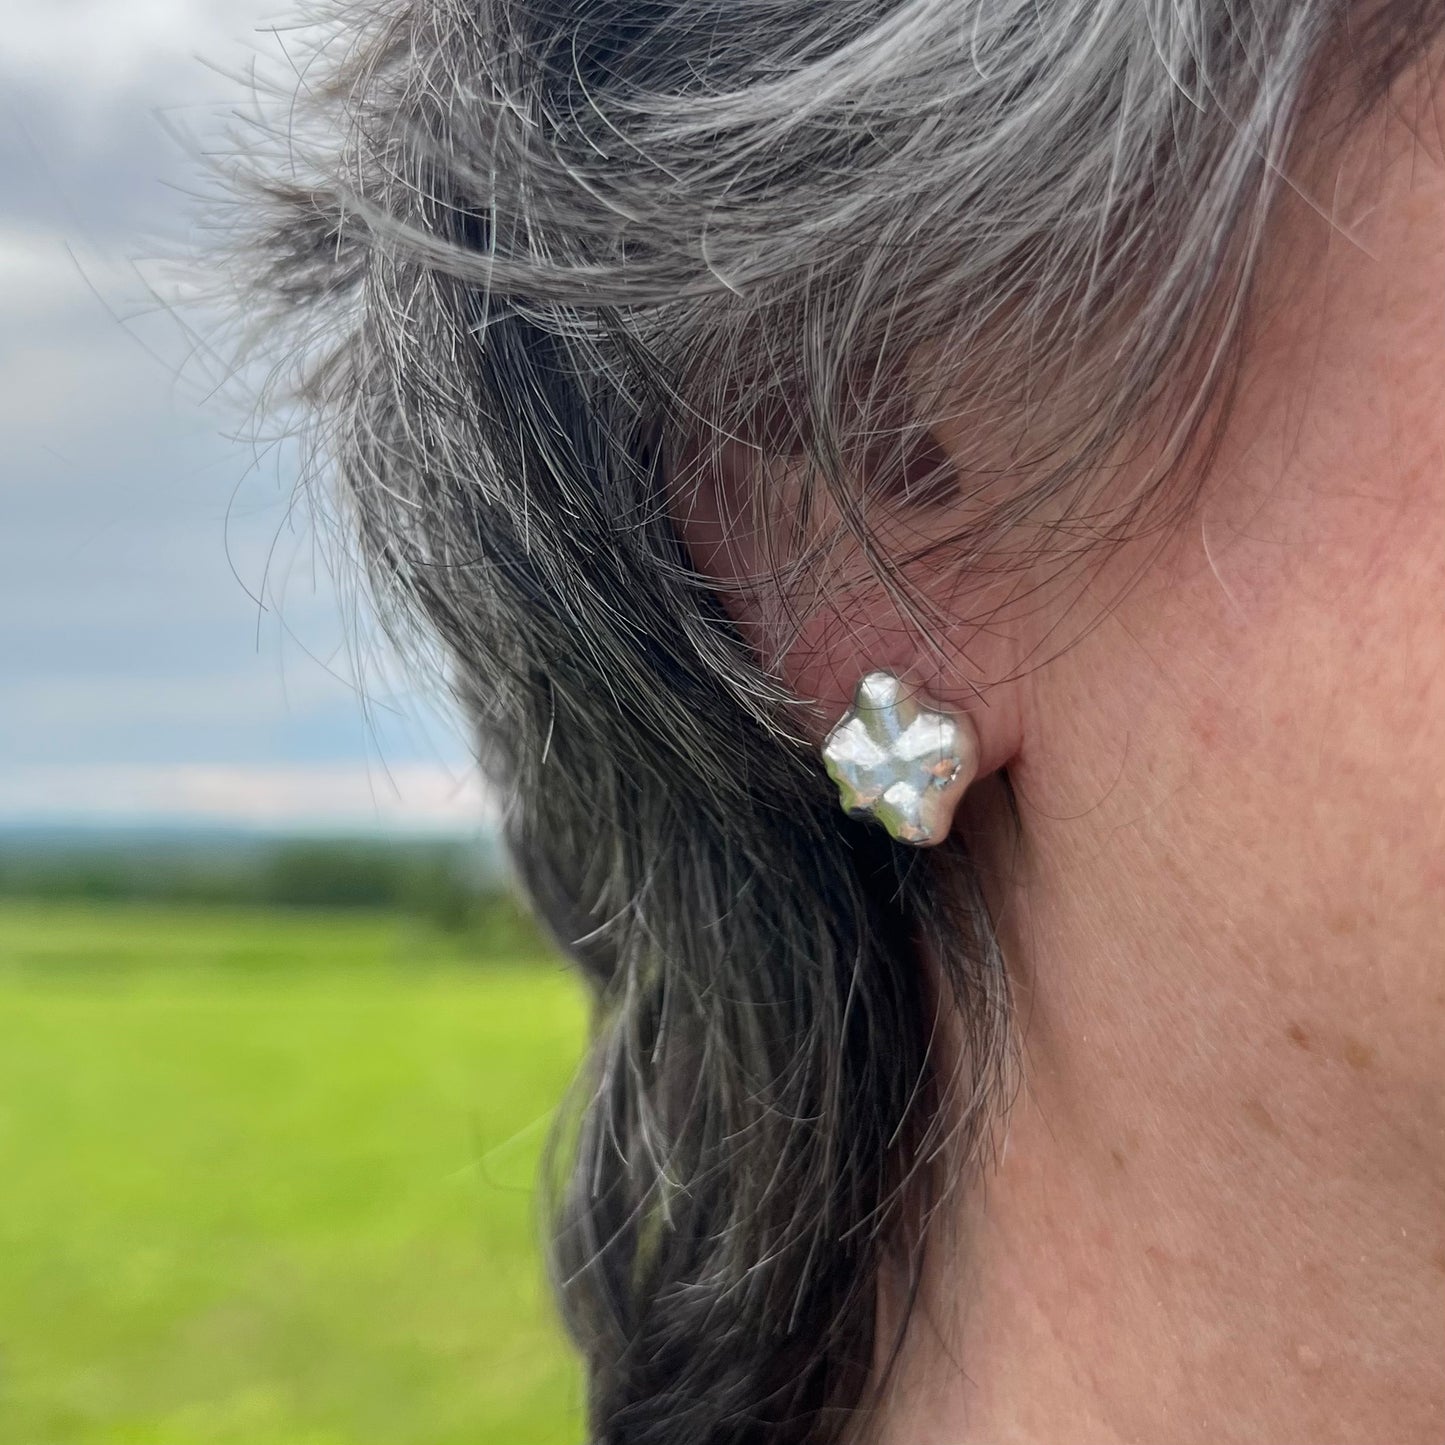 The swirling stud earrings on a woman with short black hair.